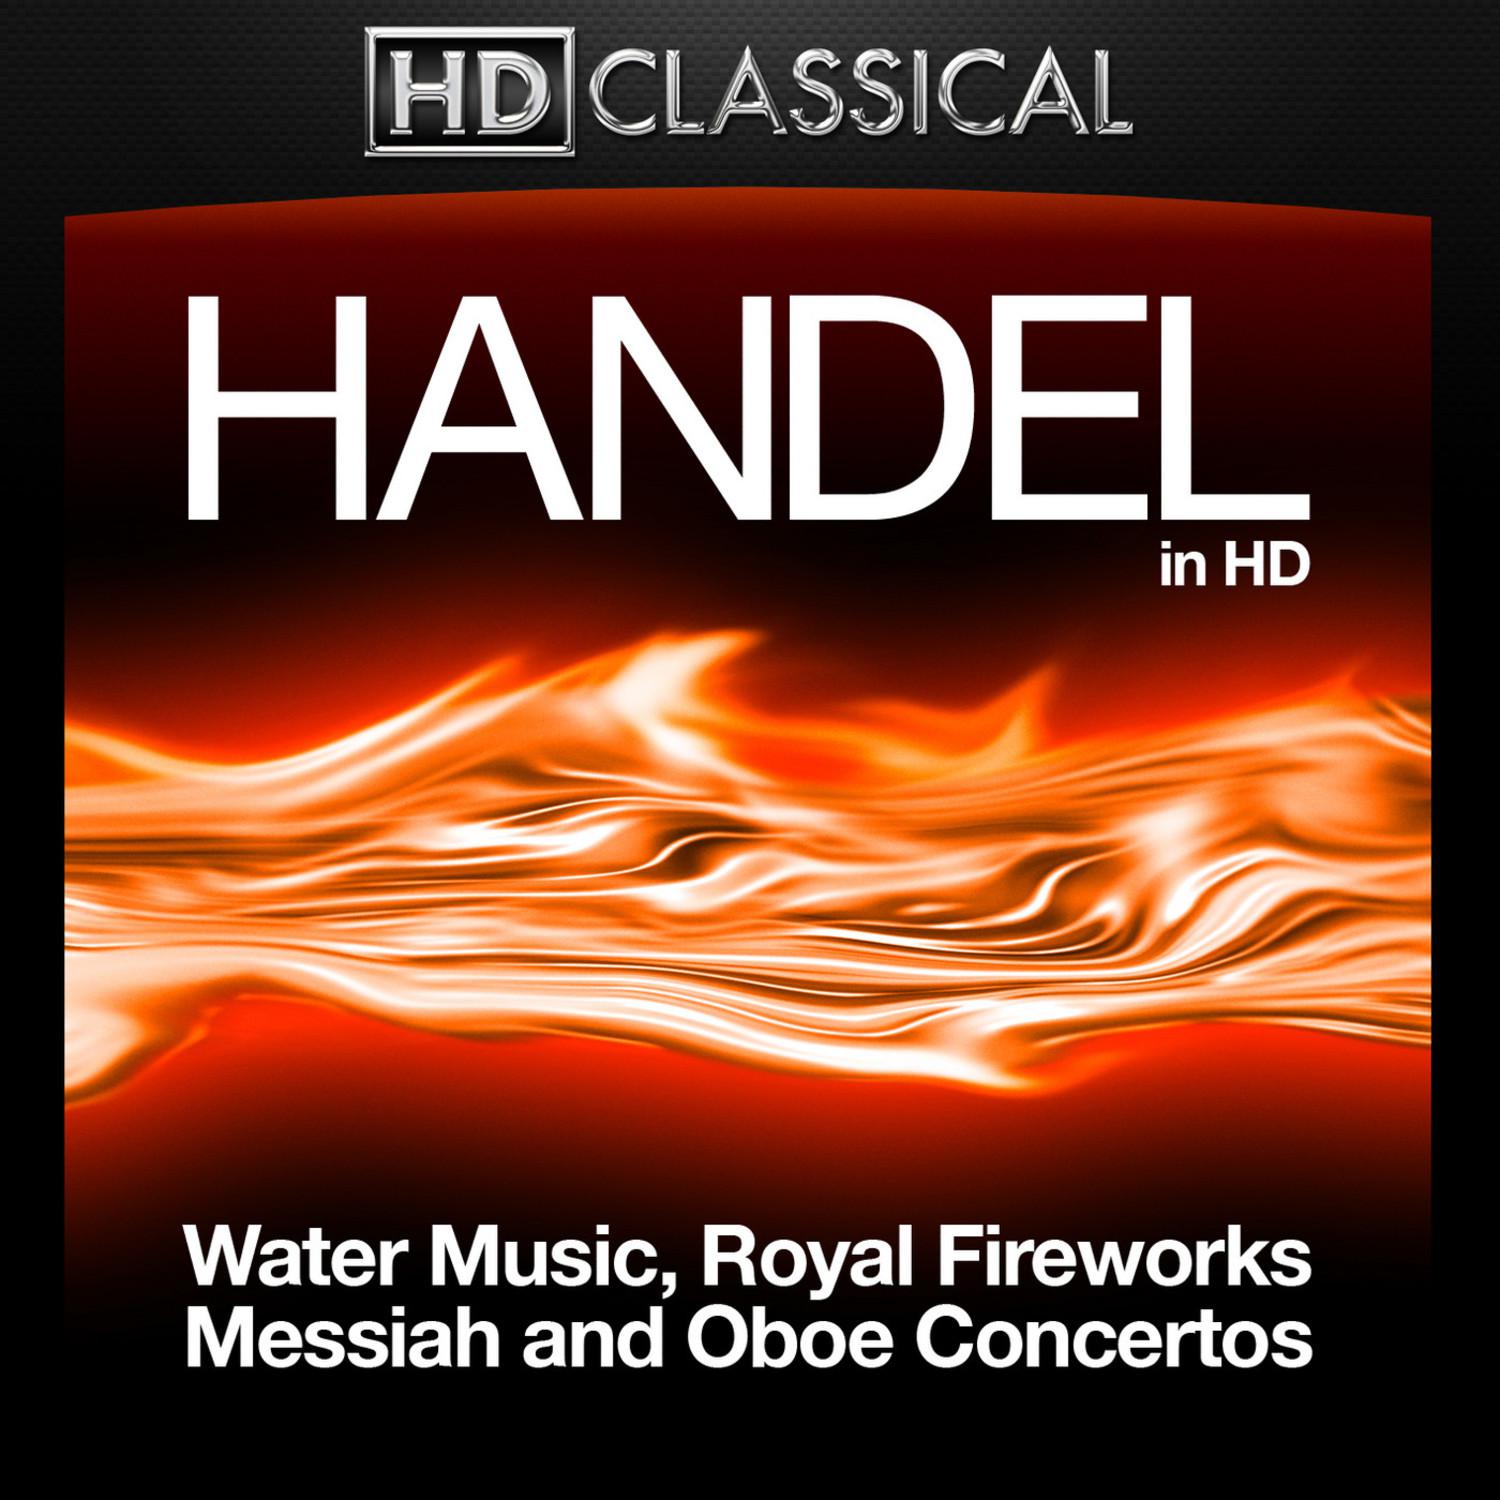 Water Music Suite No. 1 in F Major, HWV 348: IX. Hornpipe